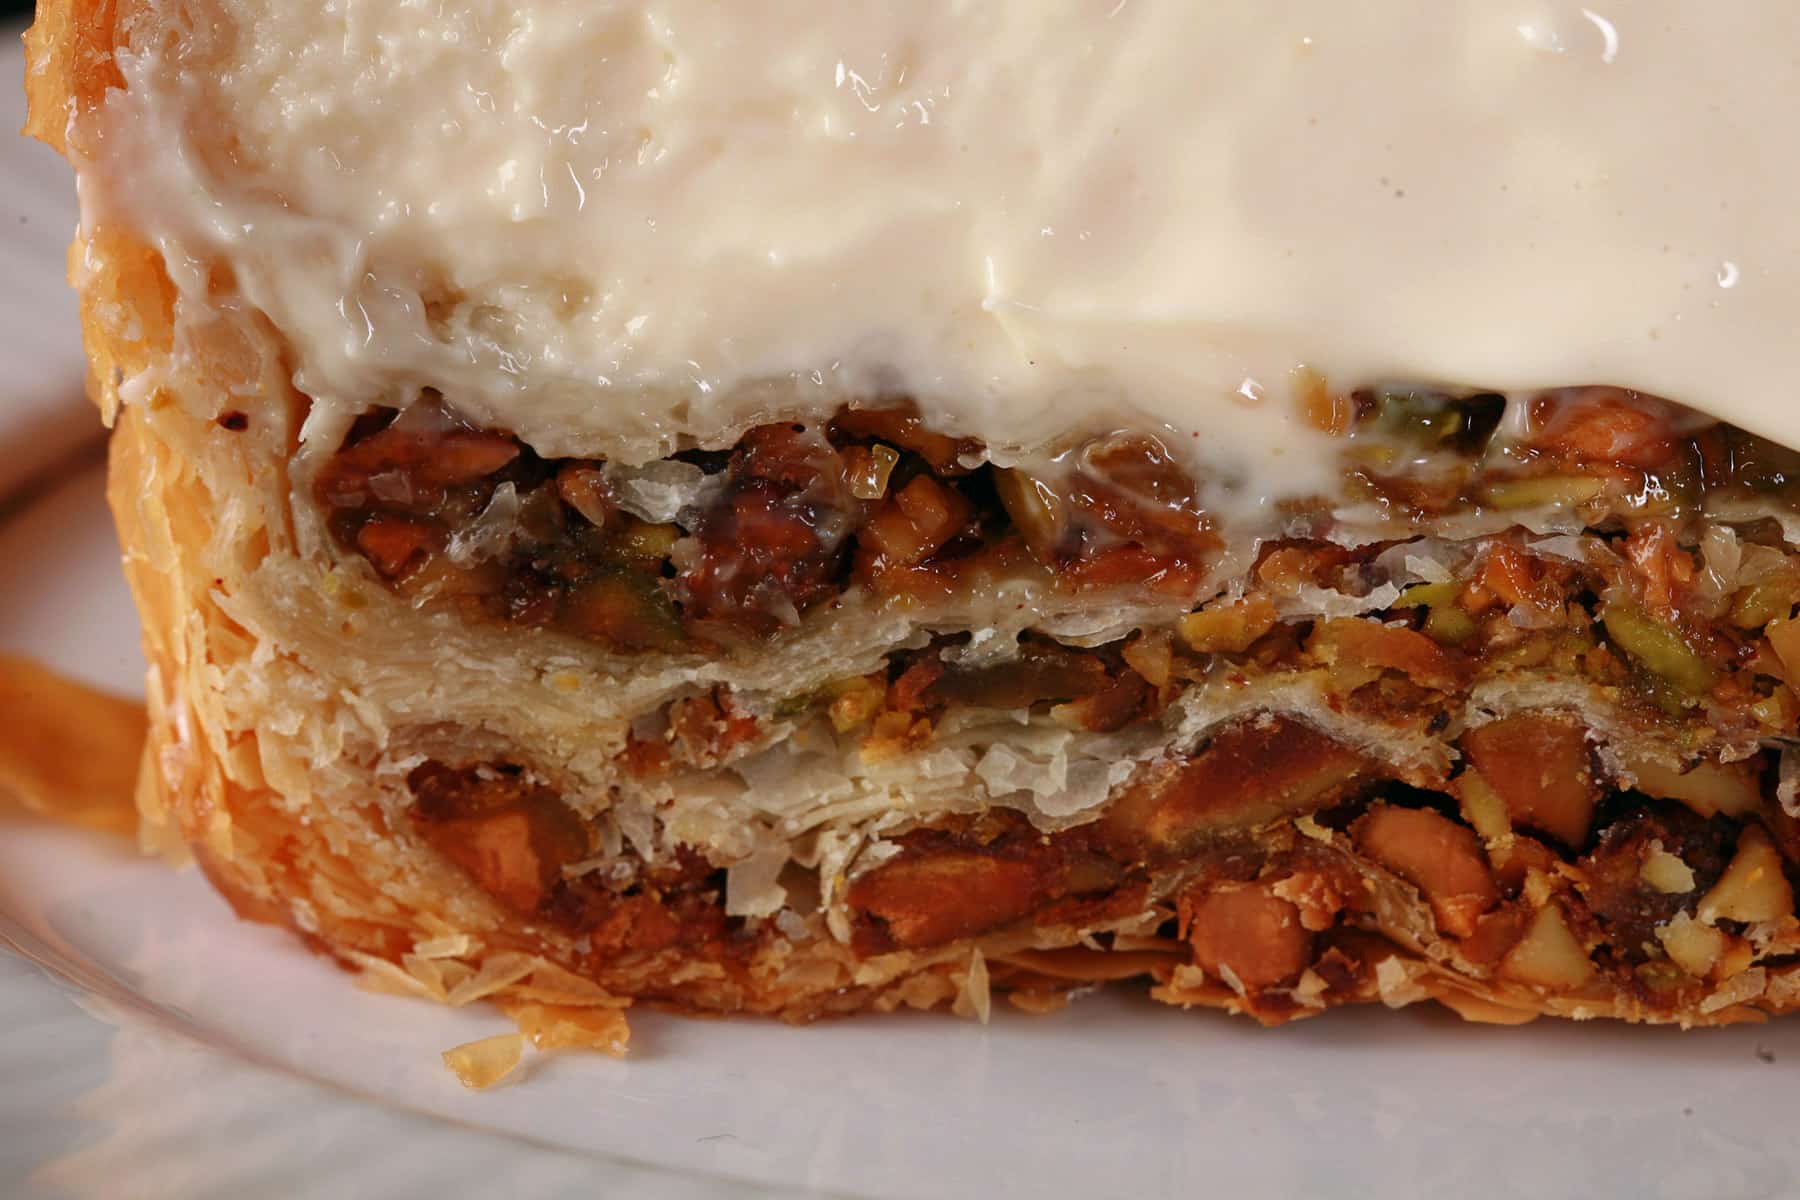 A close up view of the bottom of a slice of baklawa cheesecake, showing layers of pistachio baklava.